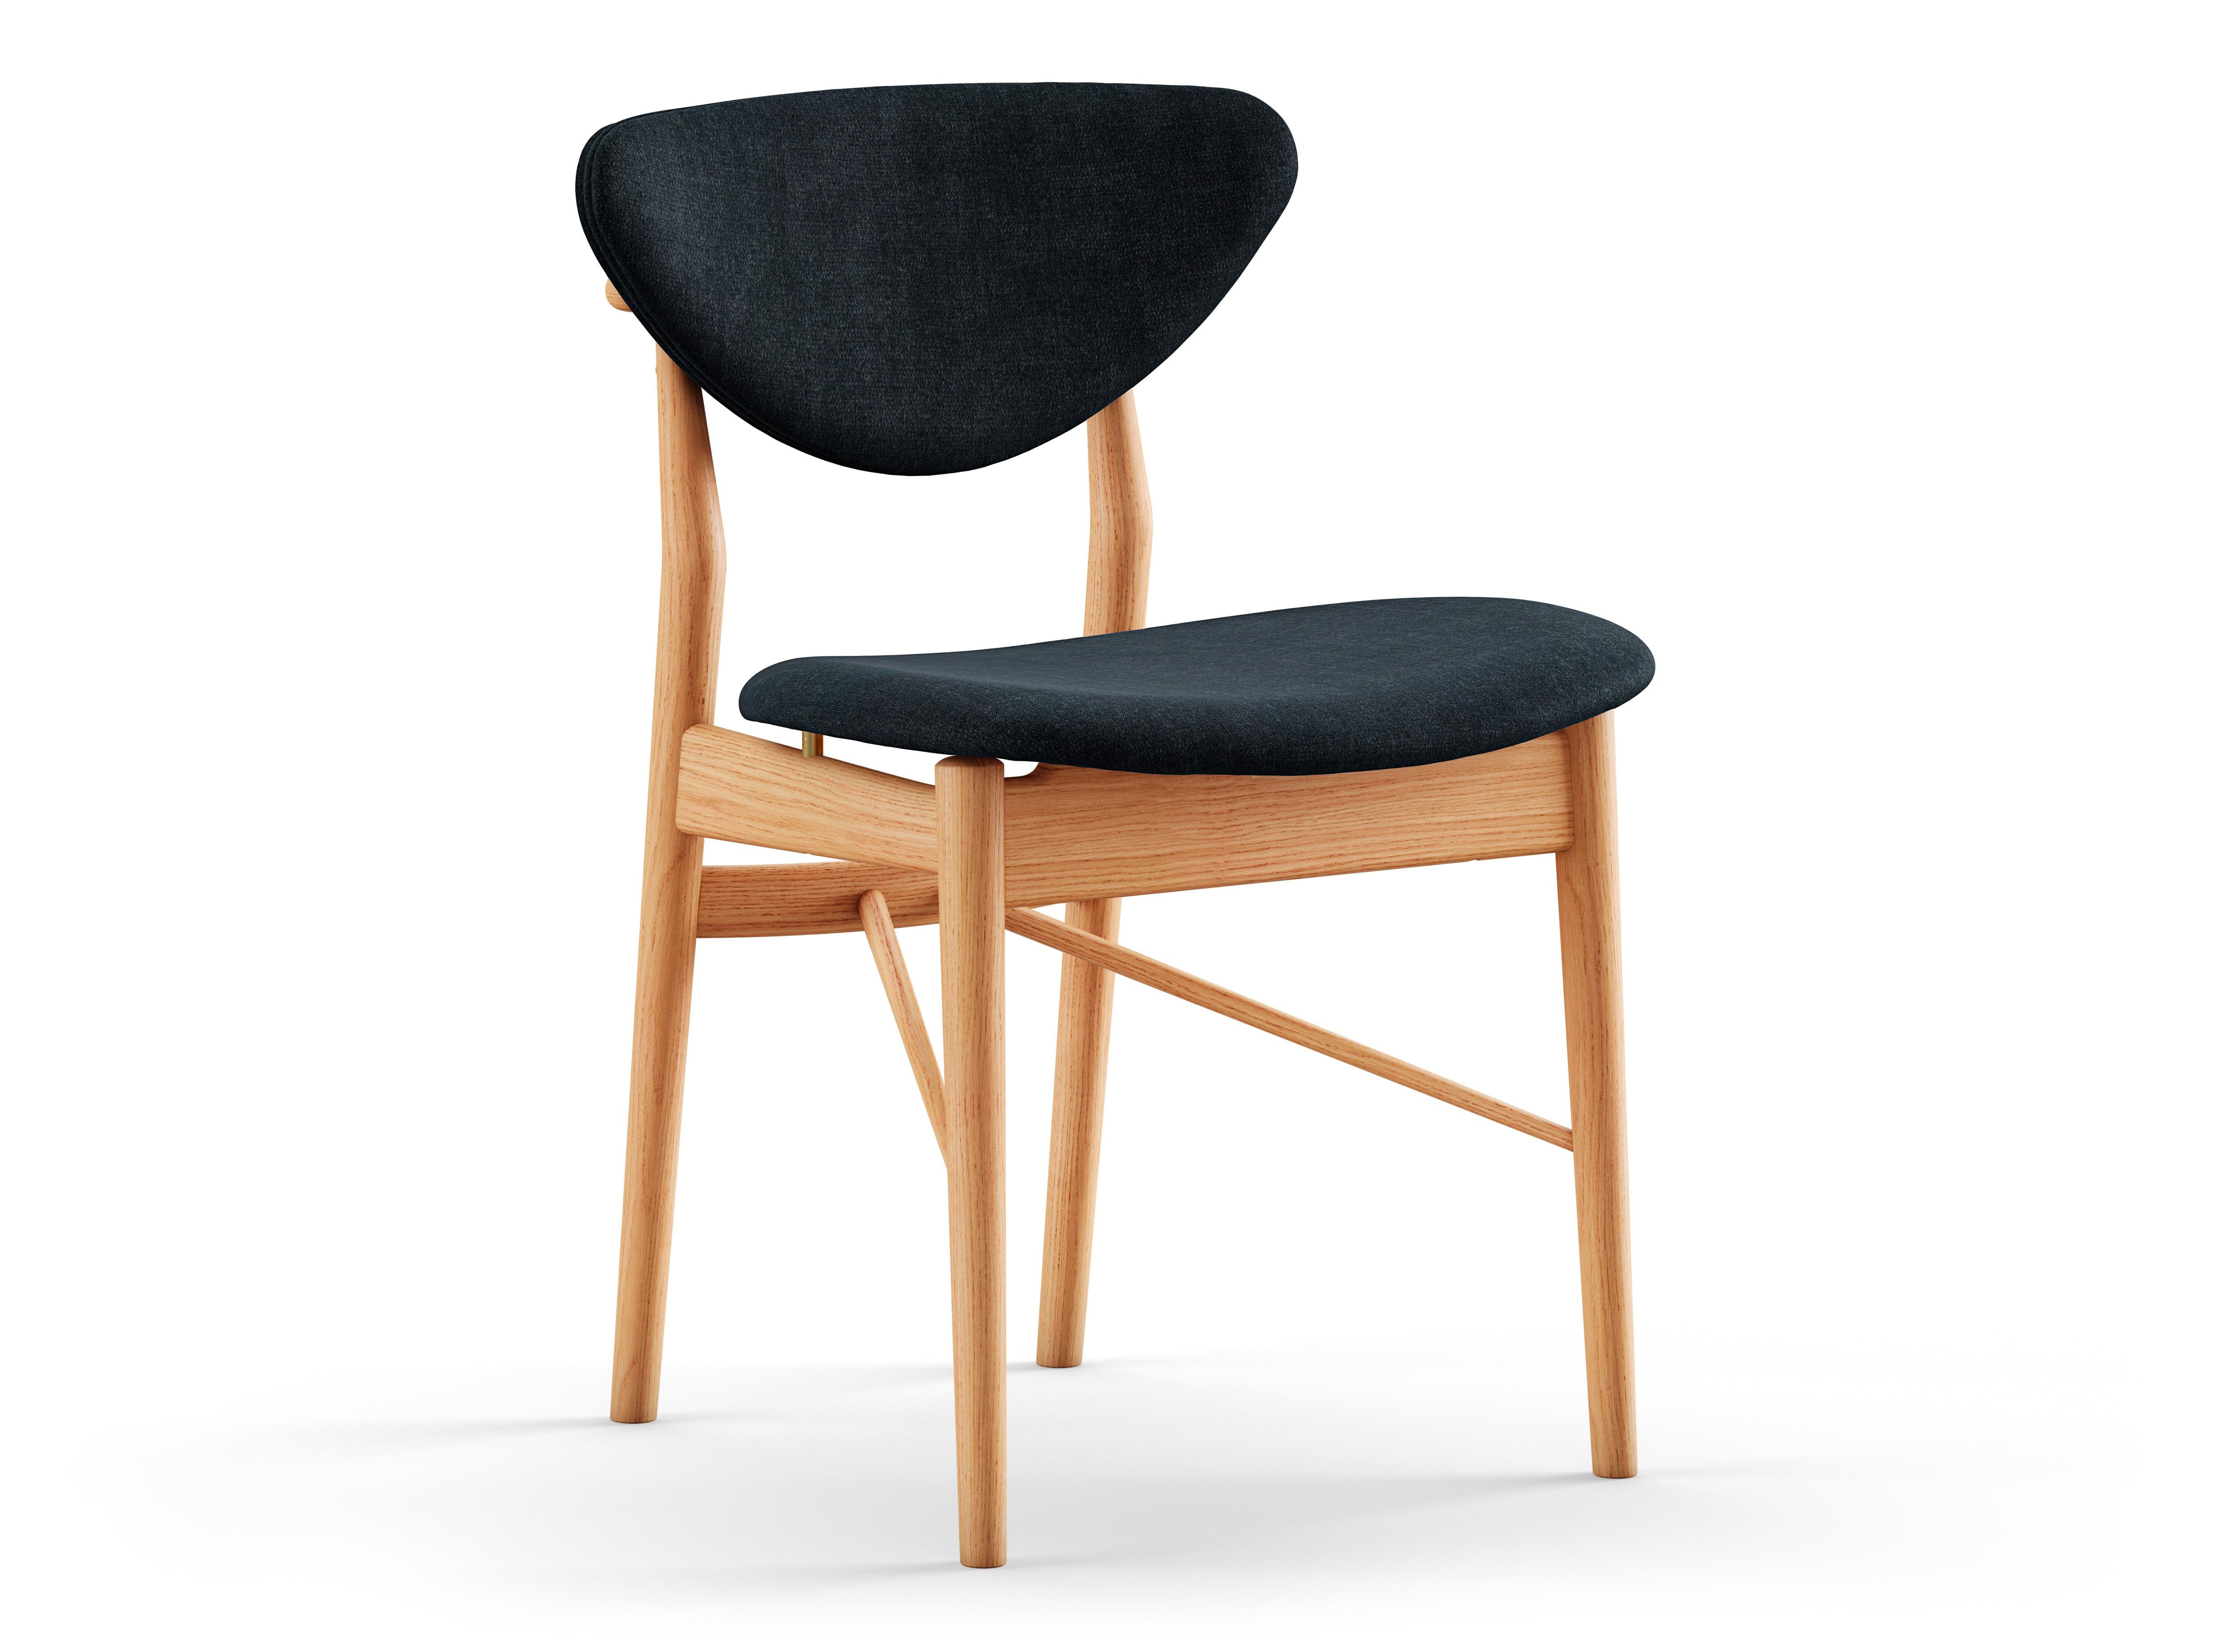 Chair designed by Finn Juhl in 1946, relaunched in 208.
Manufactured by House of Finn Juhl in Denmark.

To this day, Finn Juhl's designs are unconventional and defy expectations with subtle details. Finn Juhl himself once said that the deviation